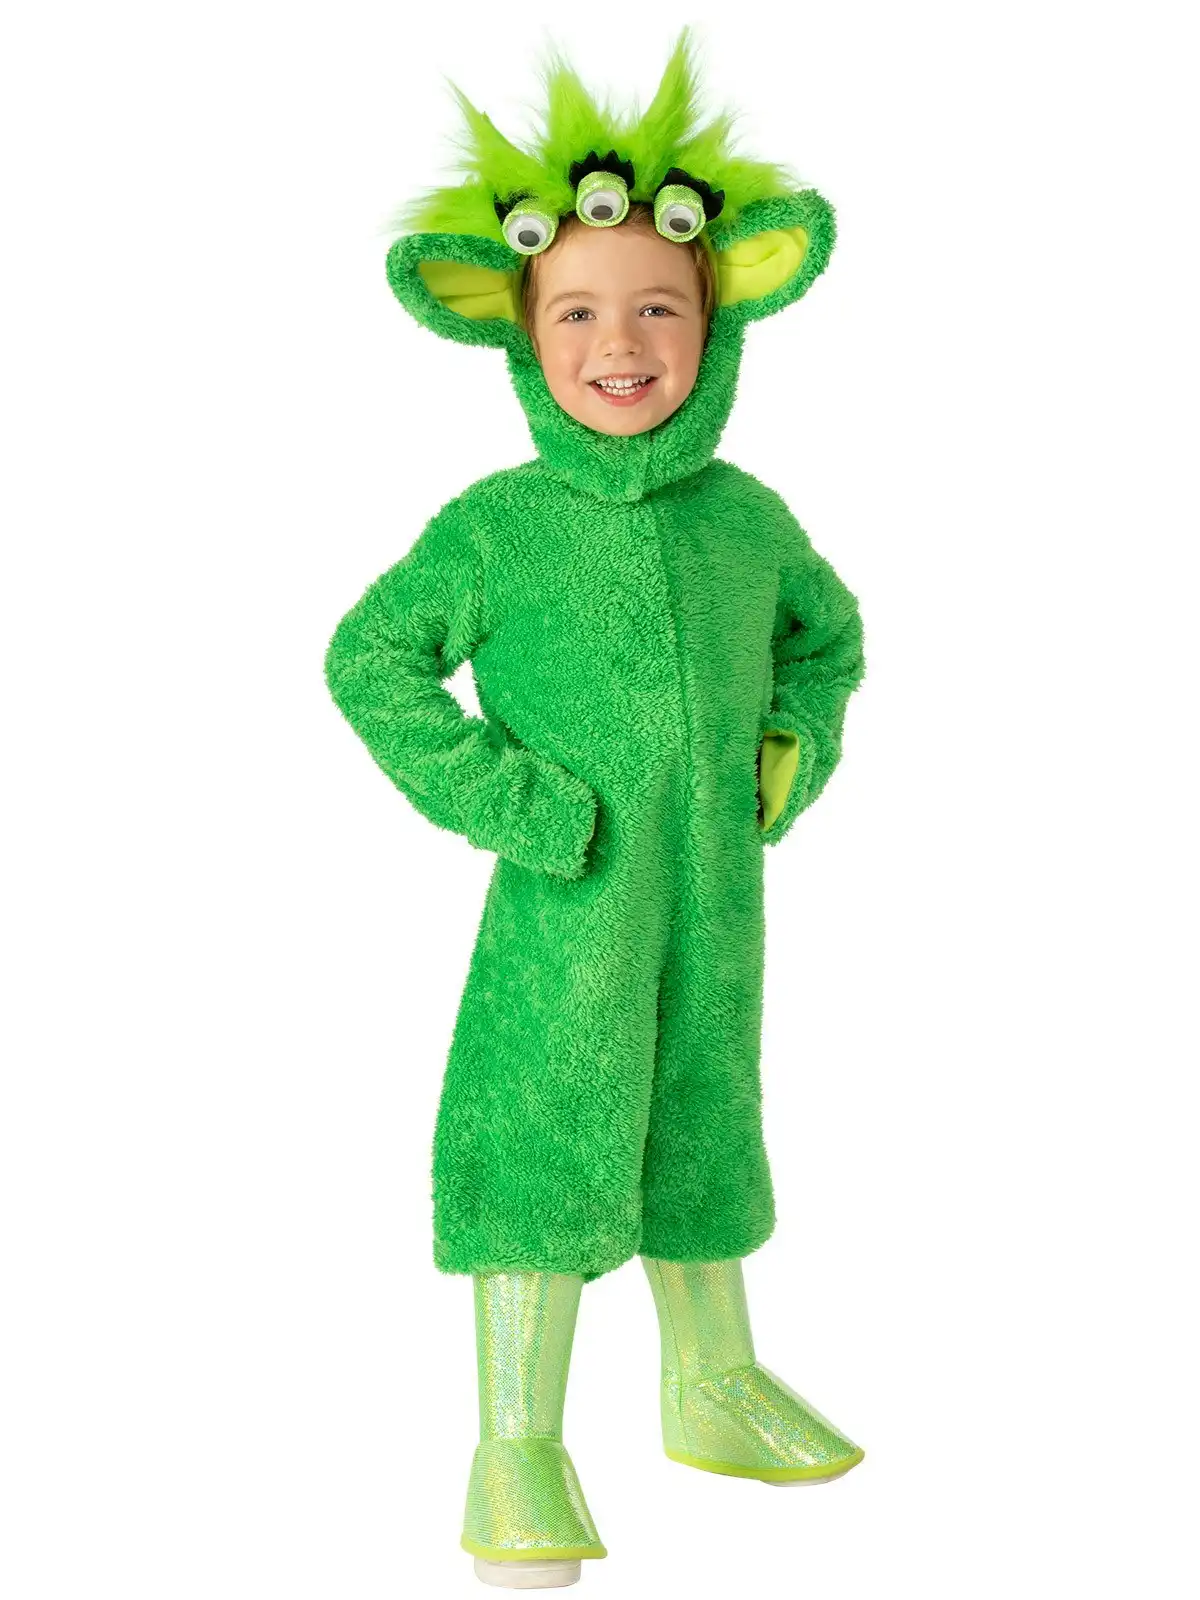 Rubies Martian Fury Dress Up Party Costume Green - Size Unisex Toddler/Baby